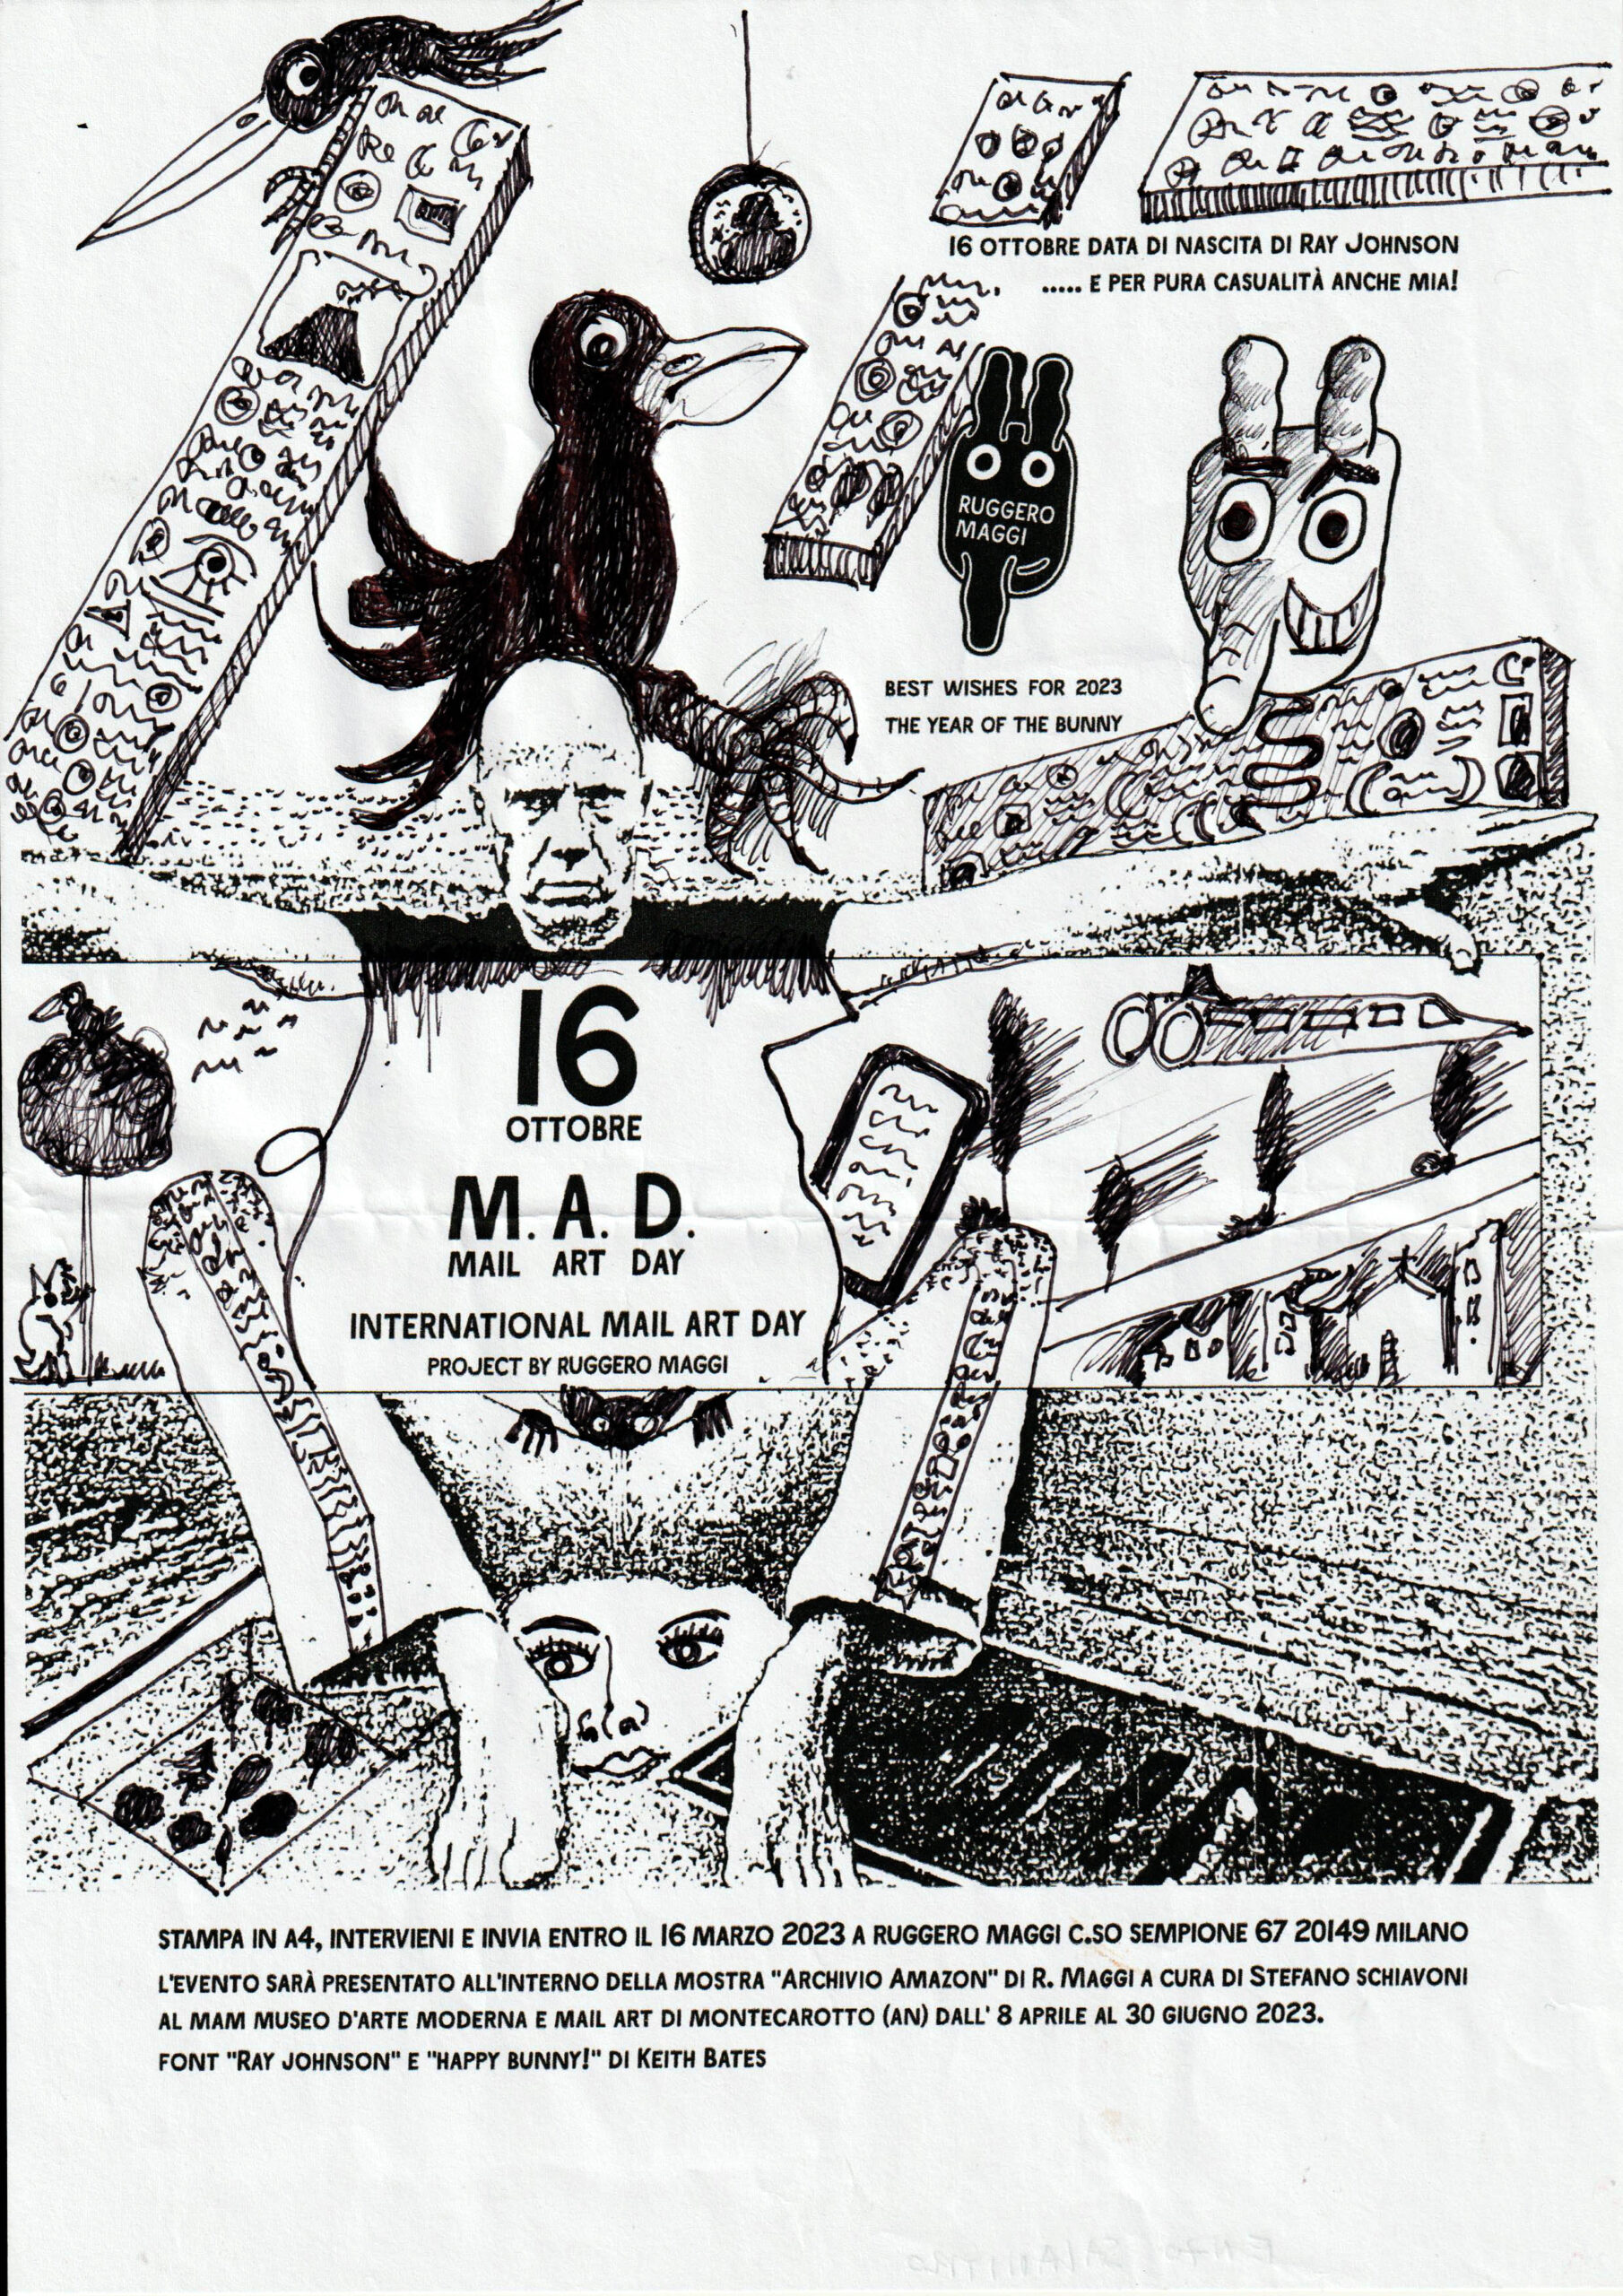 M.A.D. - Mail Art Day: Enzo Salanitro, Italy